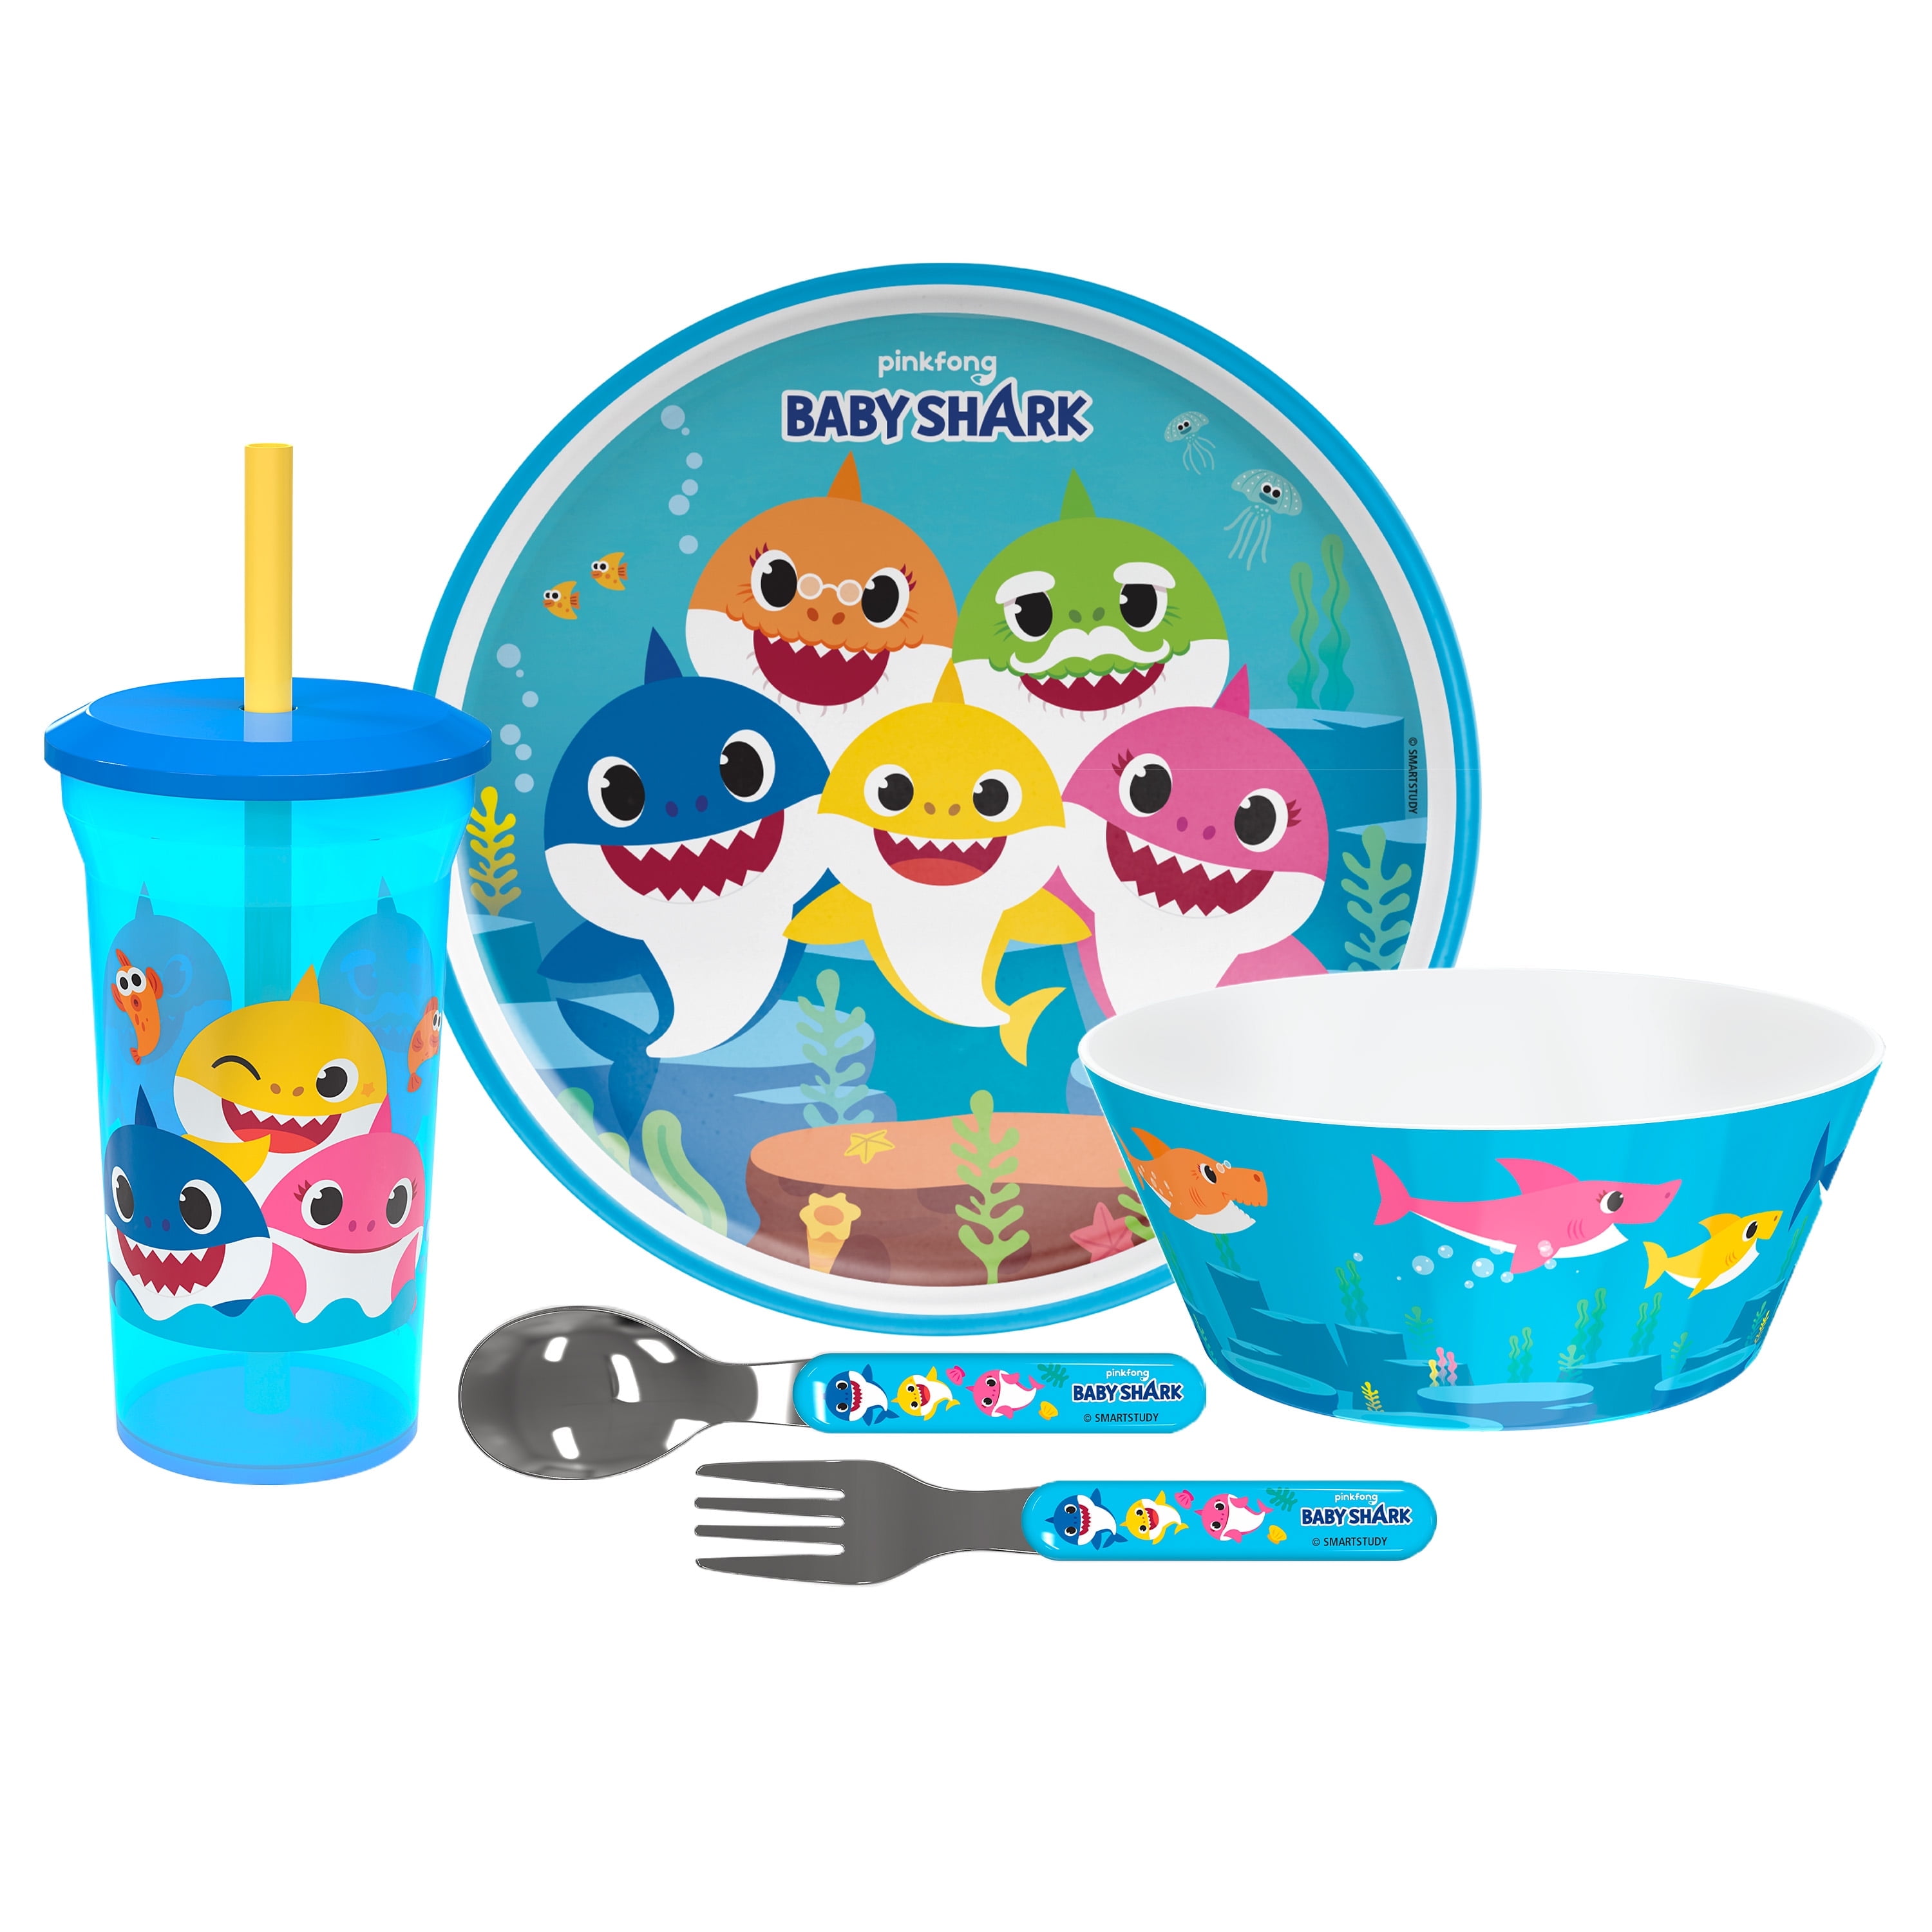 Zak Designs brings the fun of Toy Story 4 to every meal!